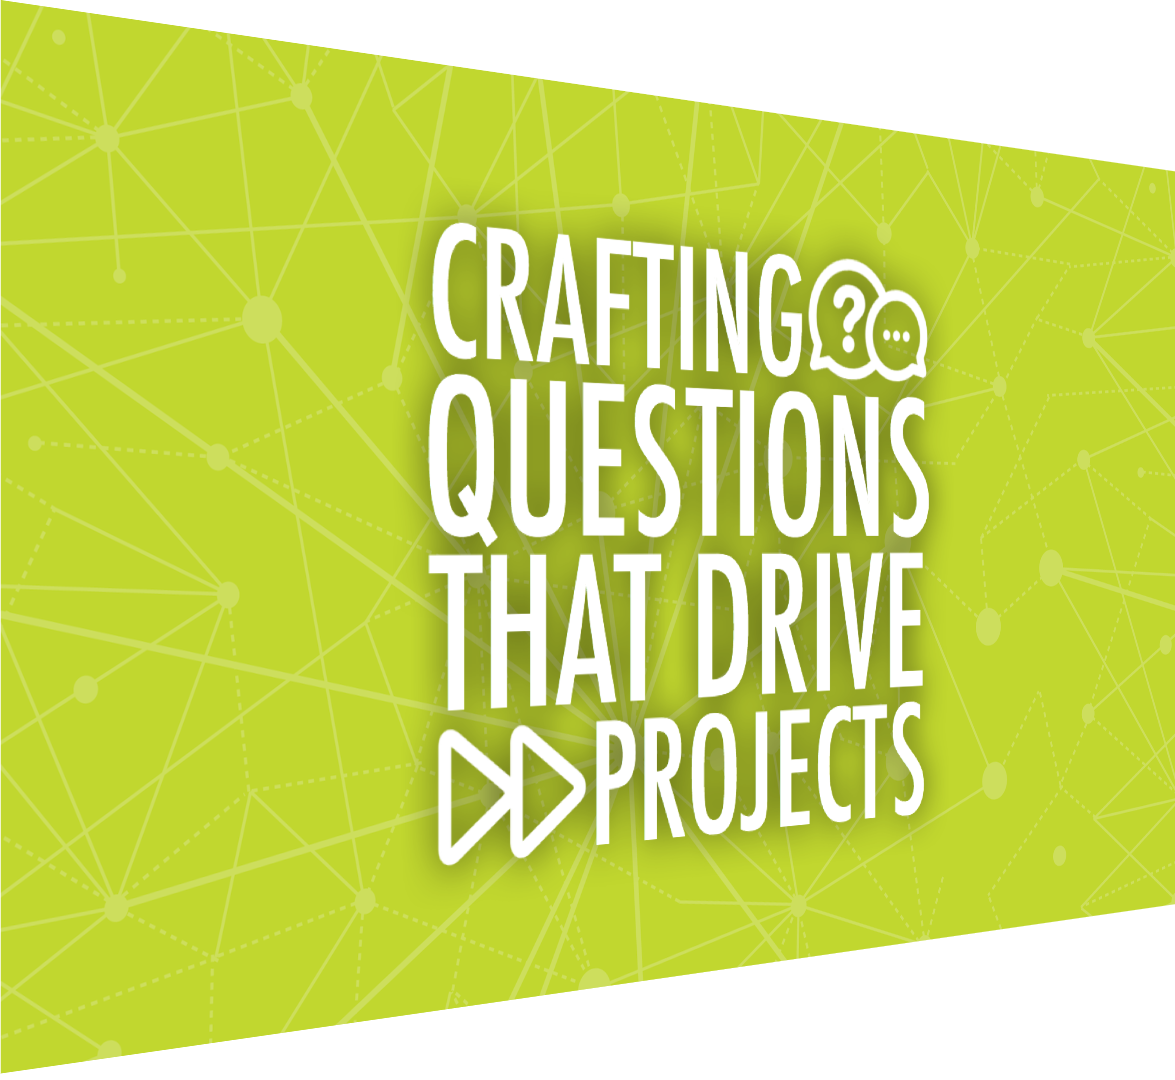 Crafting Questions That Drive Projects